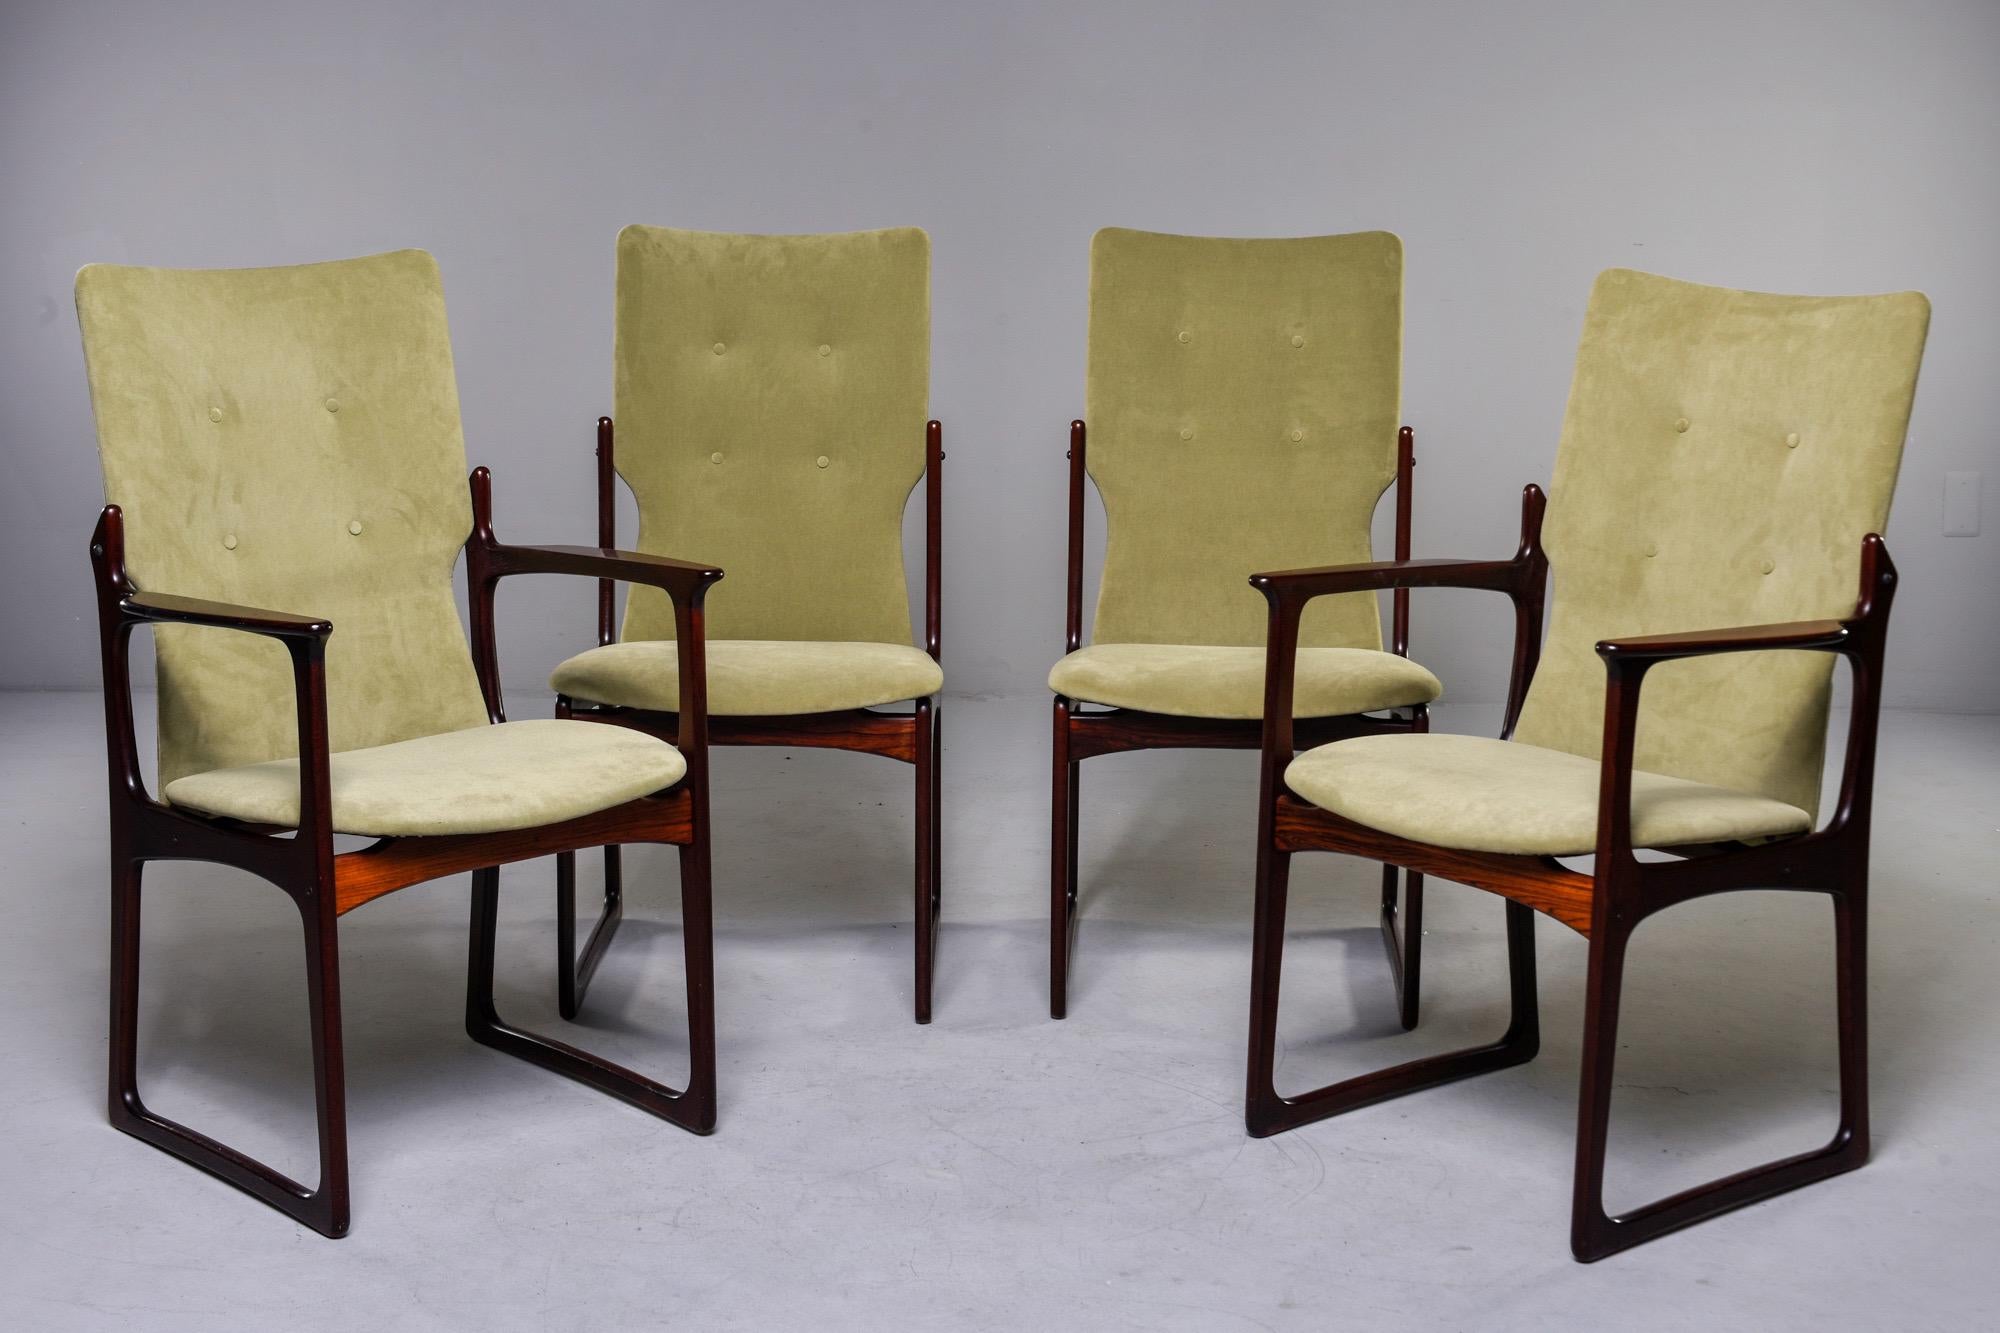 Set of eight rosewood framed dining chairs designed by Kurt Ostervig for Vamdrup of Denmark, Circa late 1960s / early 1970s. The company specialized in making dining chairs. Their full name is Vamdrup Stolefabrik (chair manufacturer) Featuring a